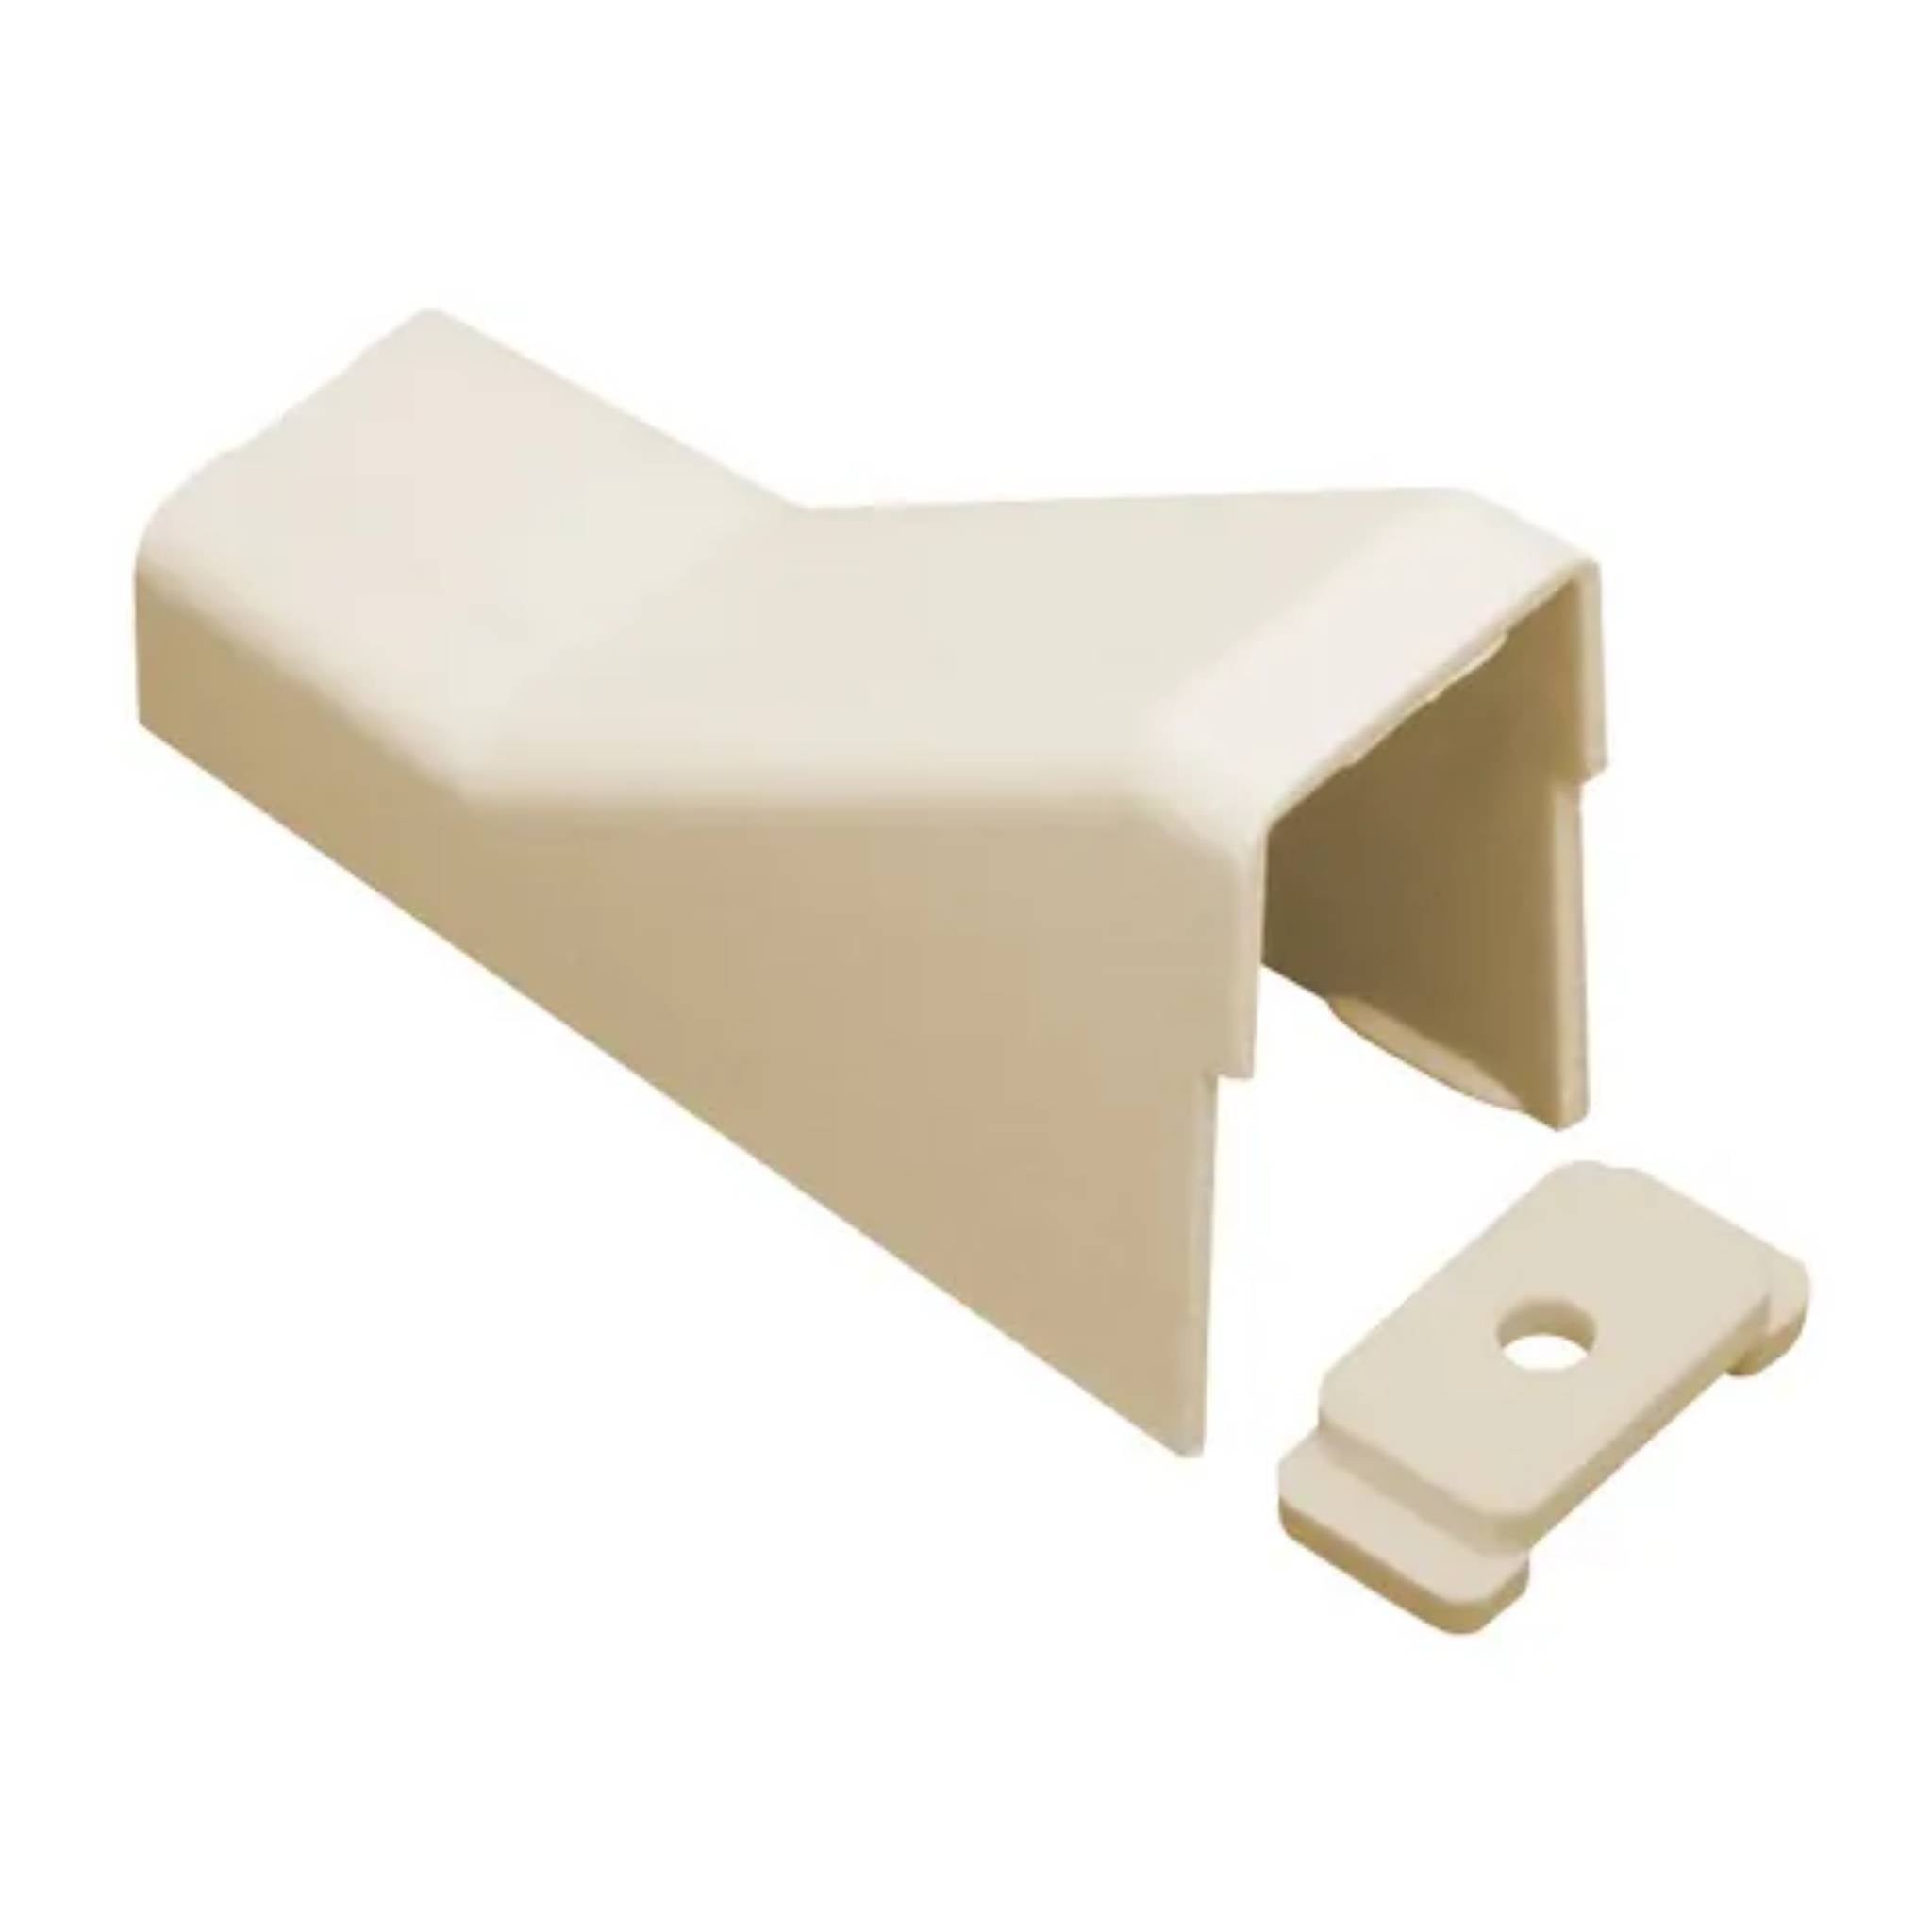 ICC Ceiling Entry & Clip, 3/4", Ivory